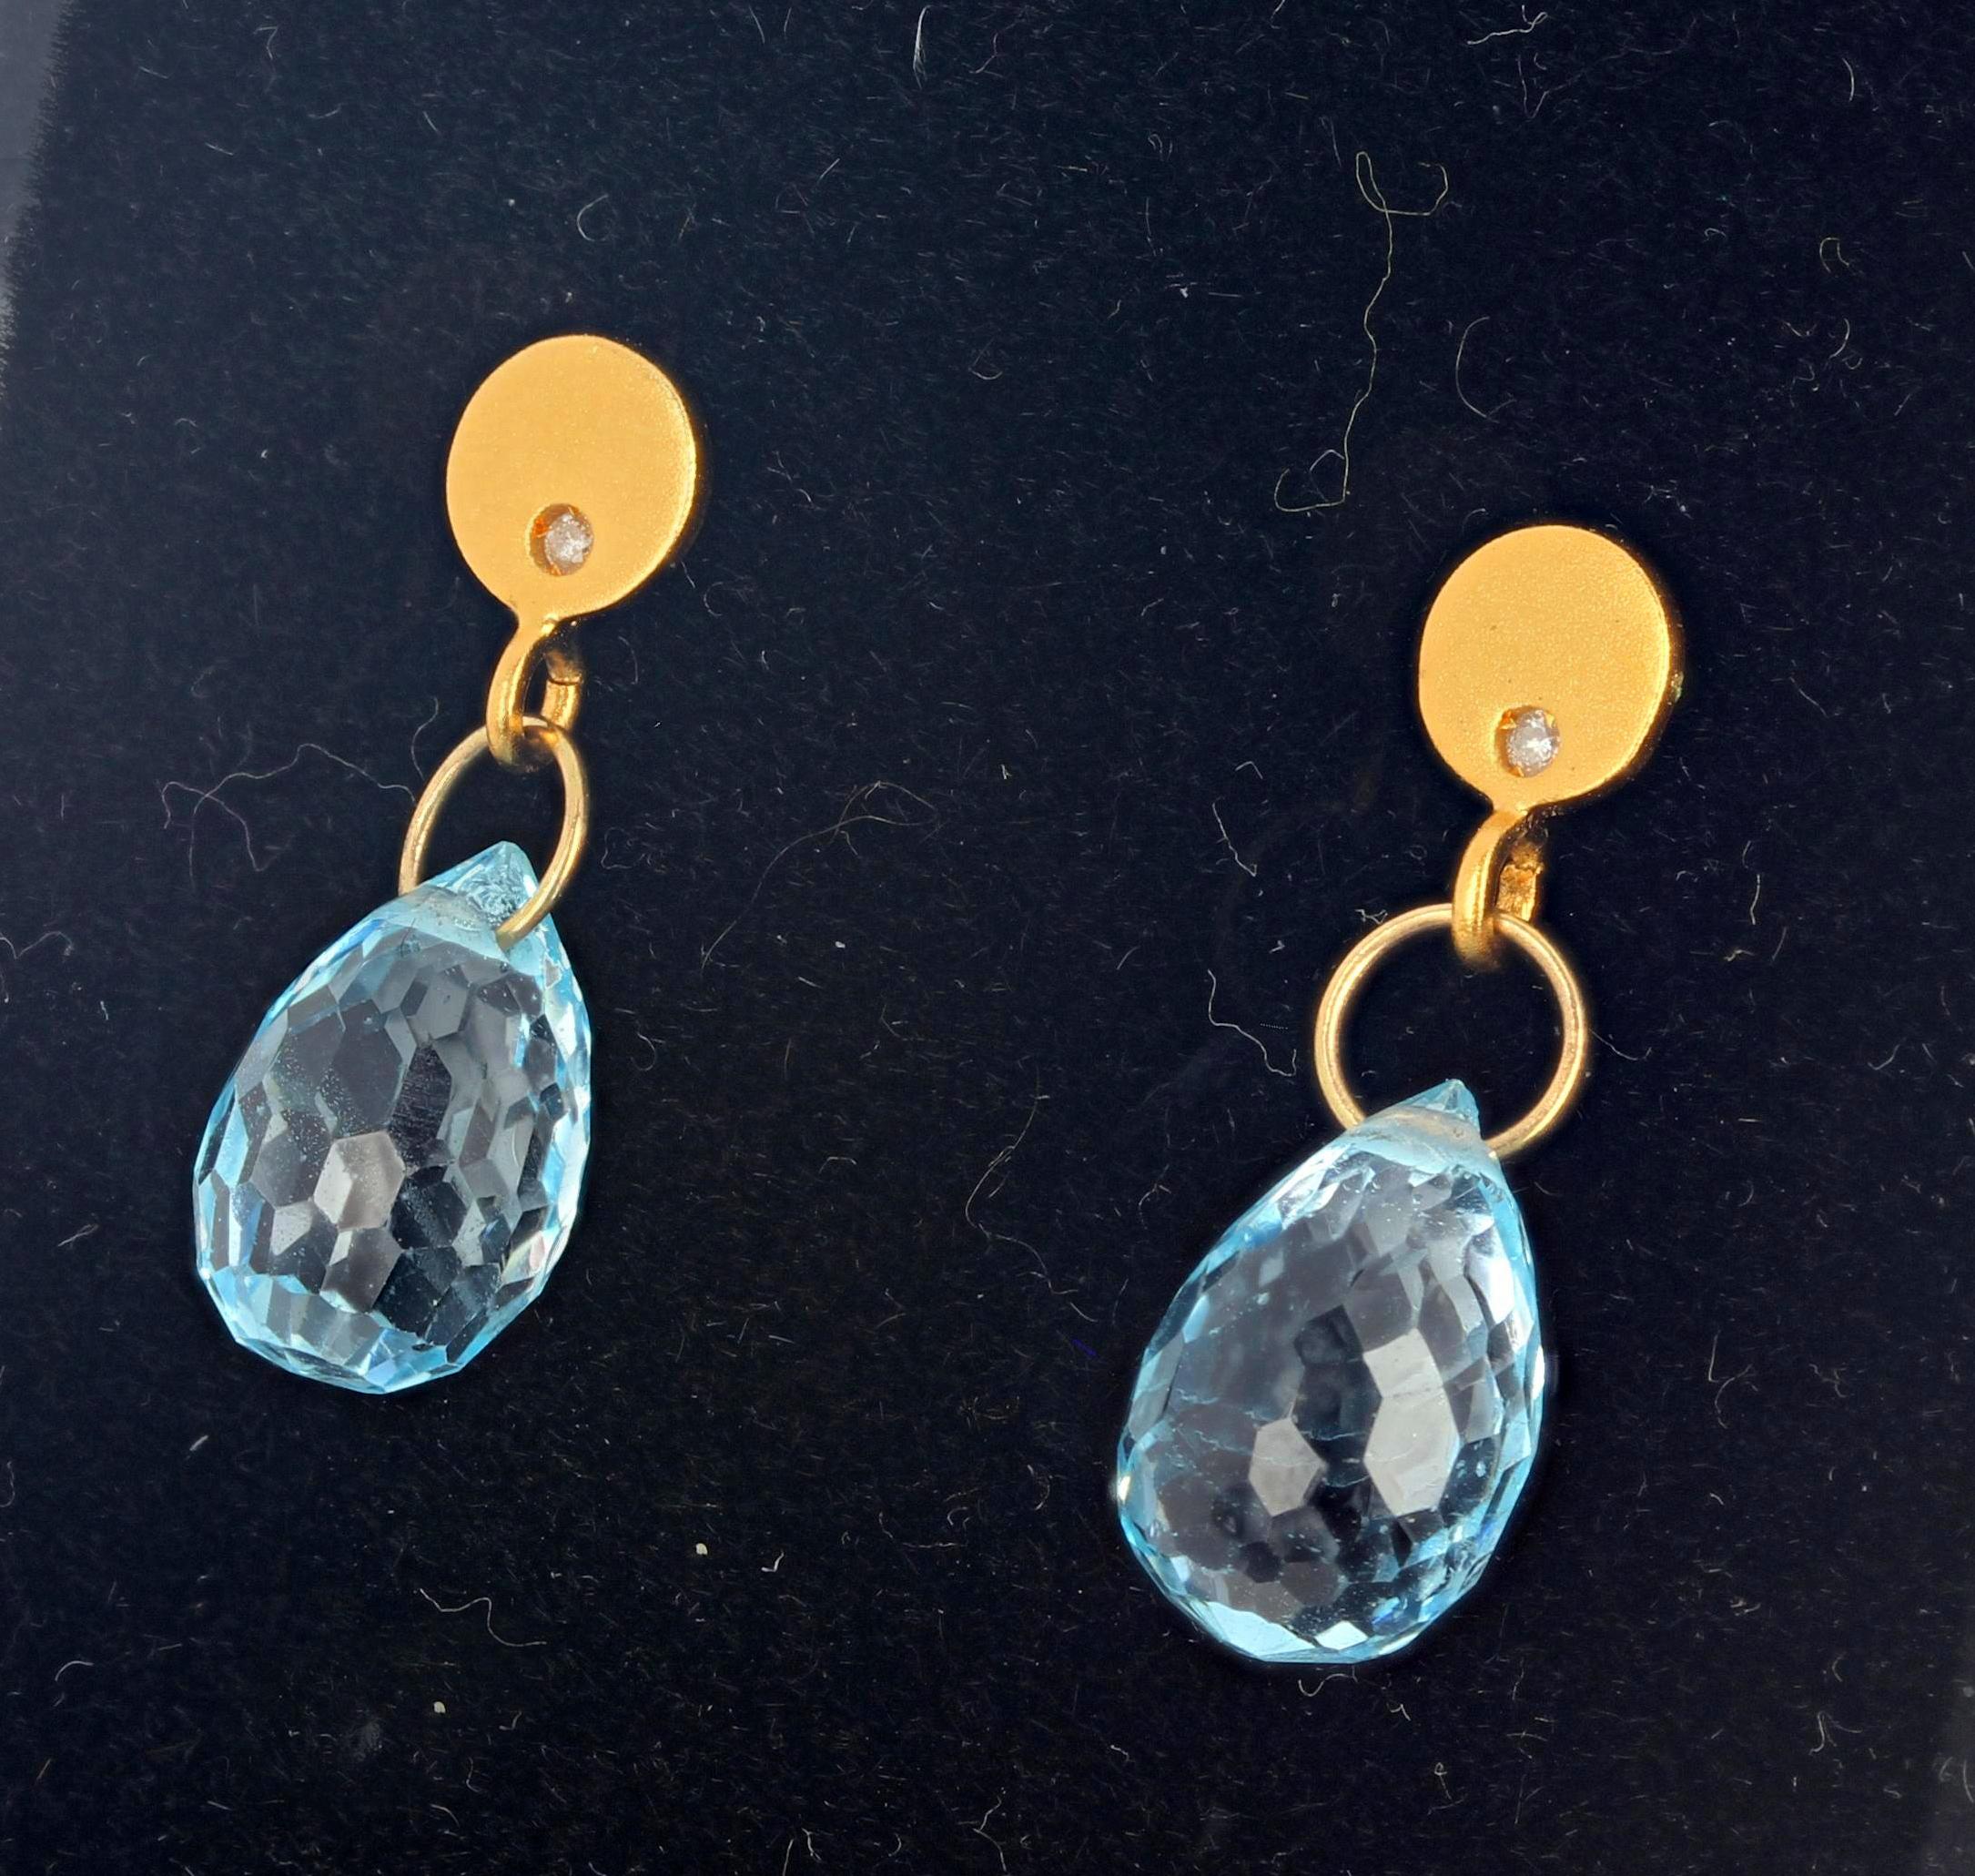 These wonderful sparkling glittery blue Topaz swing from 14Kt yellow gold stud earrings. There is a natural real Diamond in each of the earrings to match the glitter of the Topaz.  They hang approximately 7/8